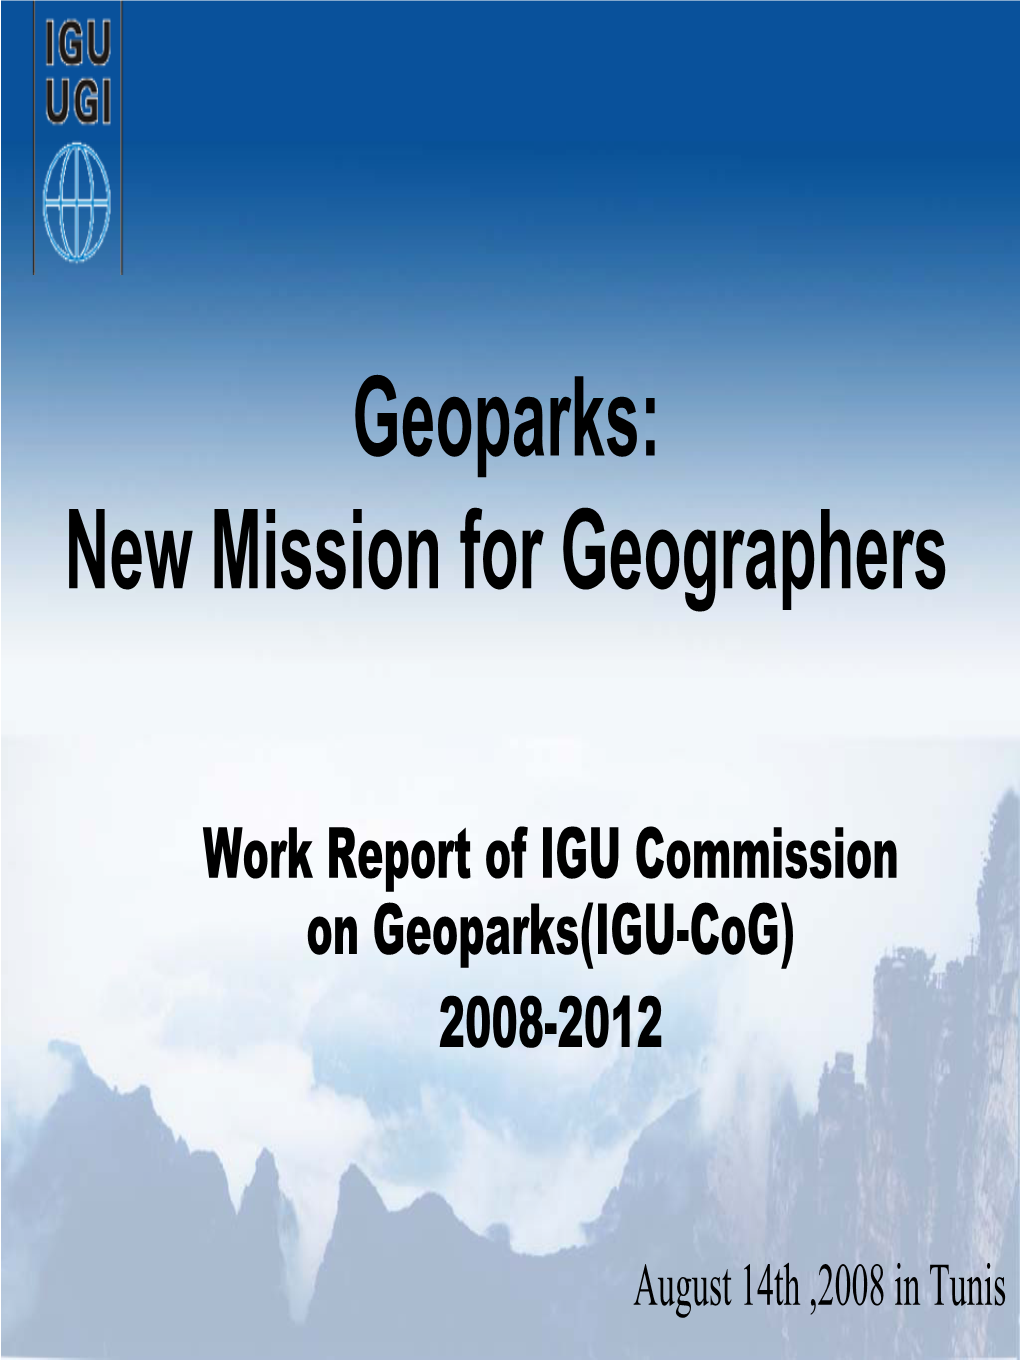 Geoparks: New Mission for Geographers